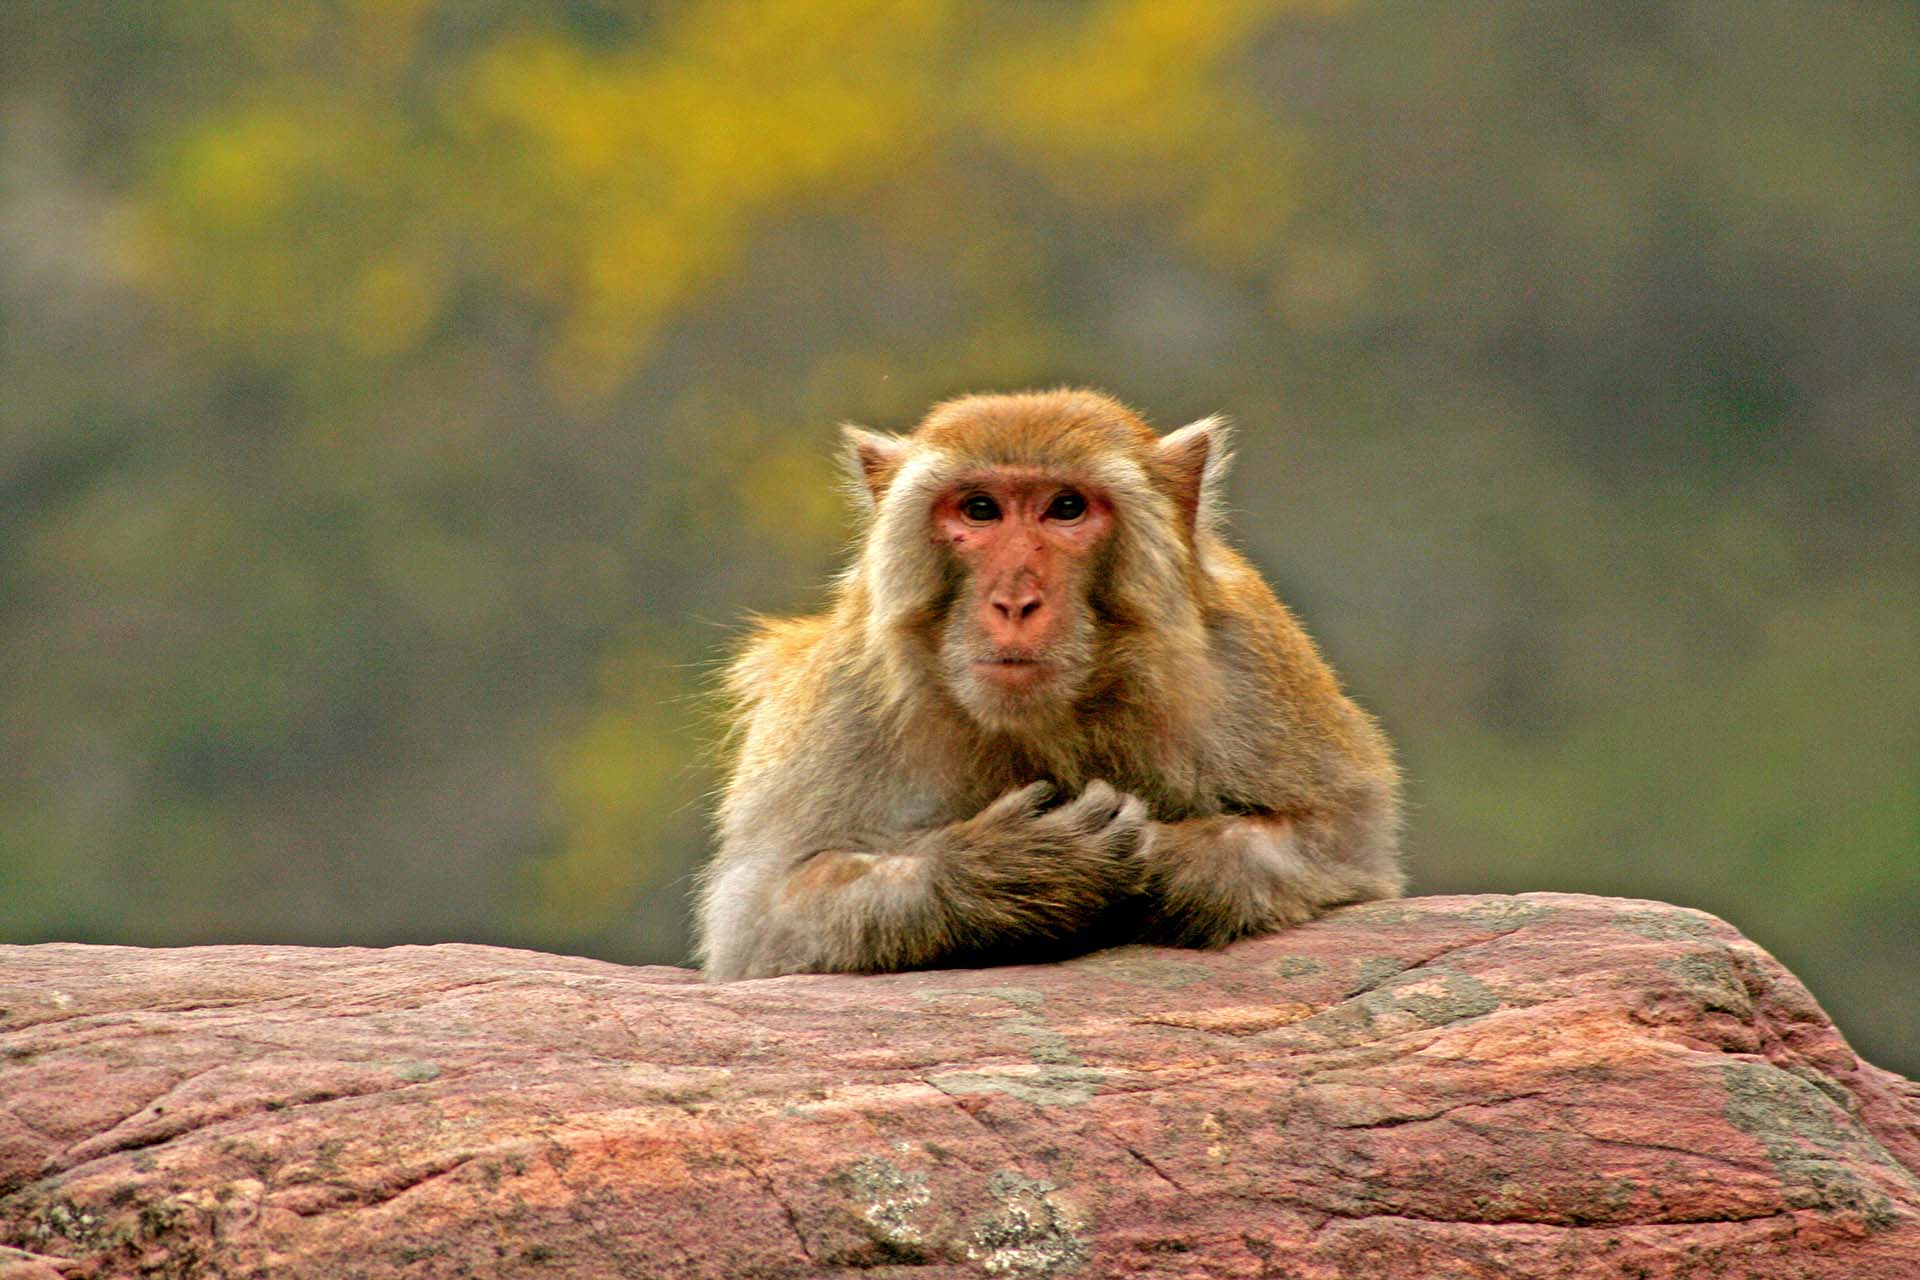 Because they don't need to search for food, they have more time than other monkeys, choosing to spend it with stones.